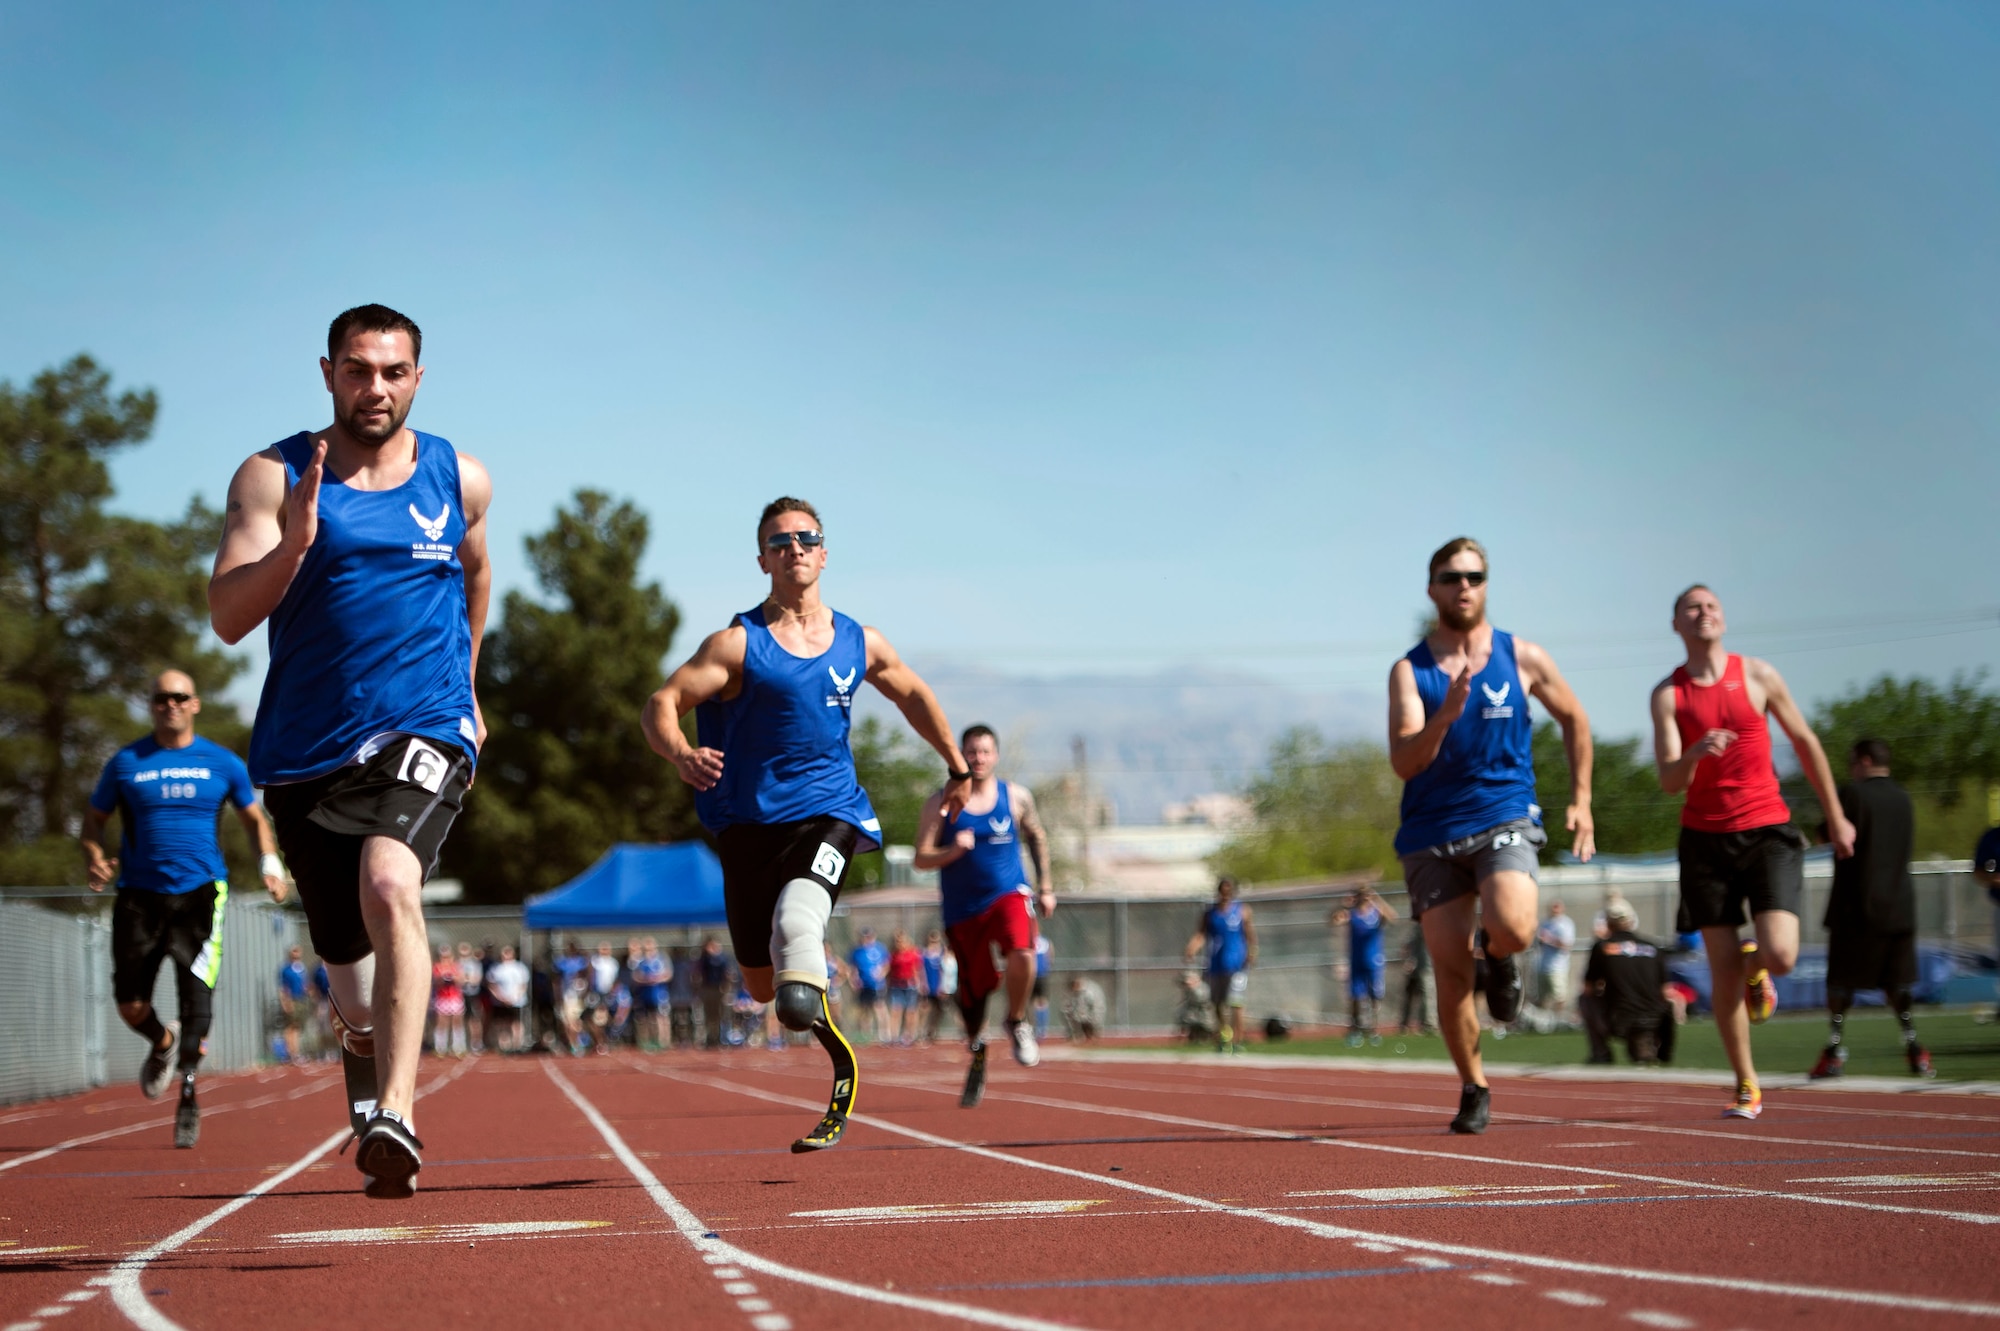 Airmen race to the finish line during the track and field portion of the Air Force Trials April 8, 2014, at Rancho High School in Las Vegas, Nev. The Air Force Trials give injured, ill and wounded Airmen a chance to compete in Paralympic-style events.  (U.S. Air Force photo/Senior Airman Jette Carr)